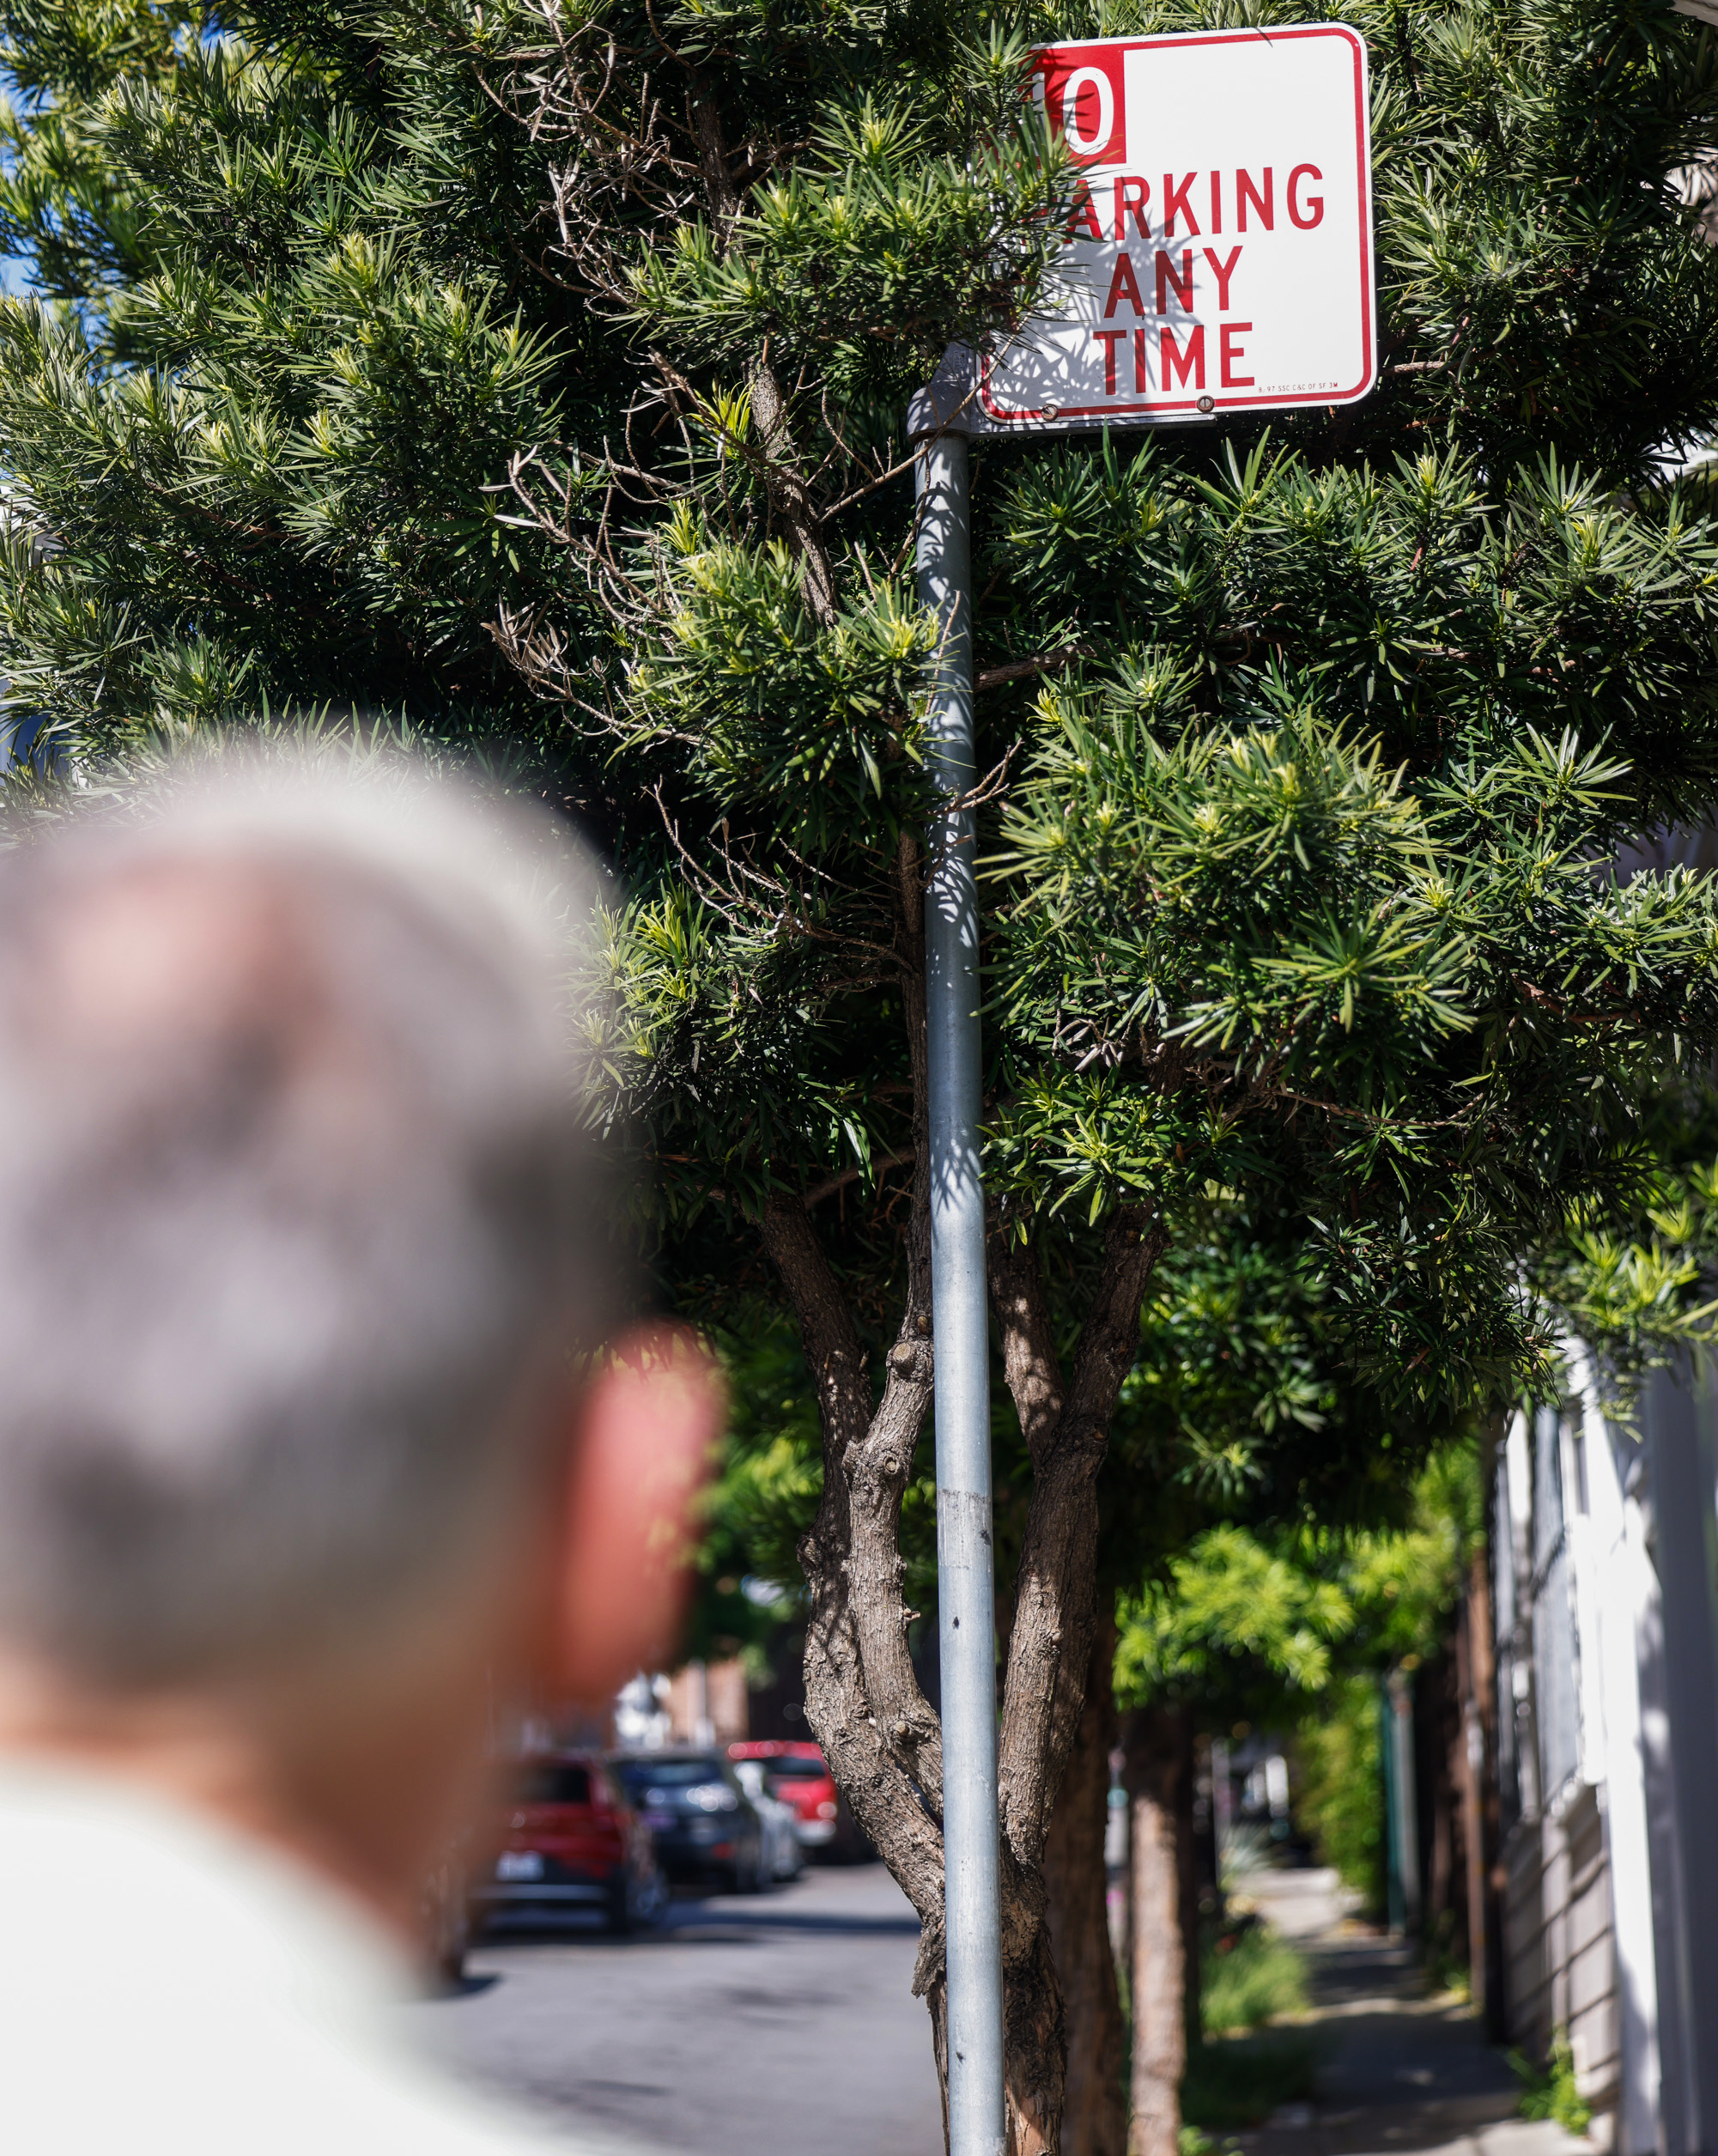 A man observes a street lined with trees, focusing on a &quot;No Parking Any Time&quot; sign on a metal pole.